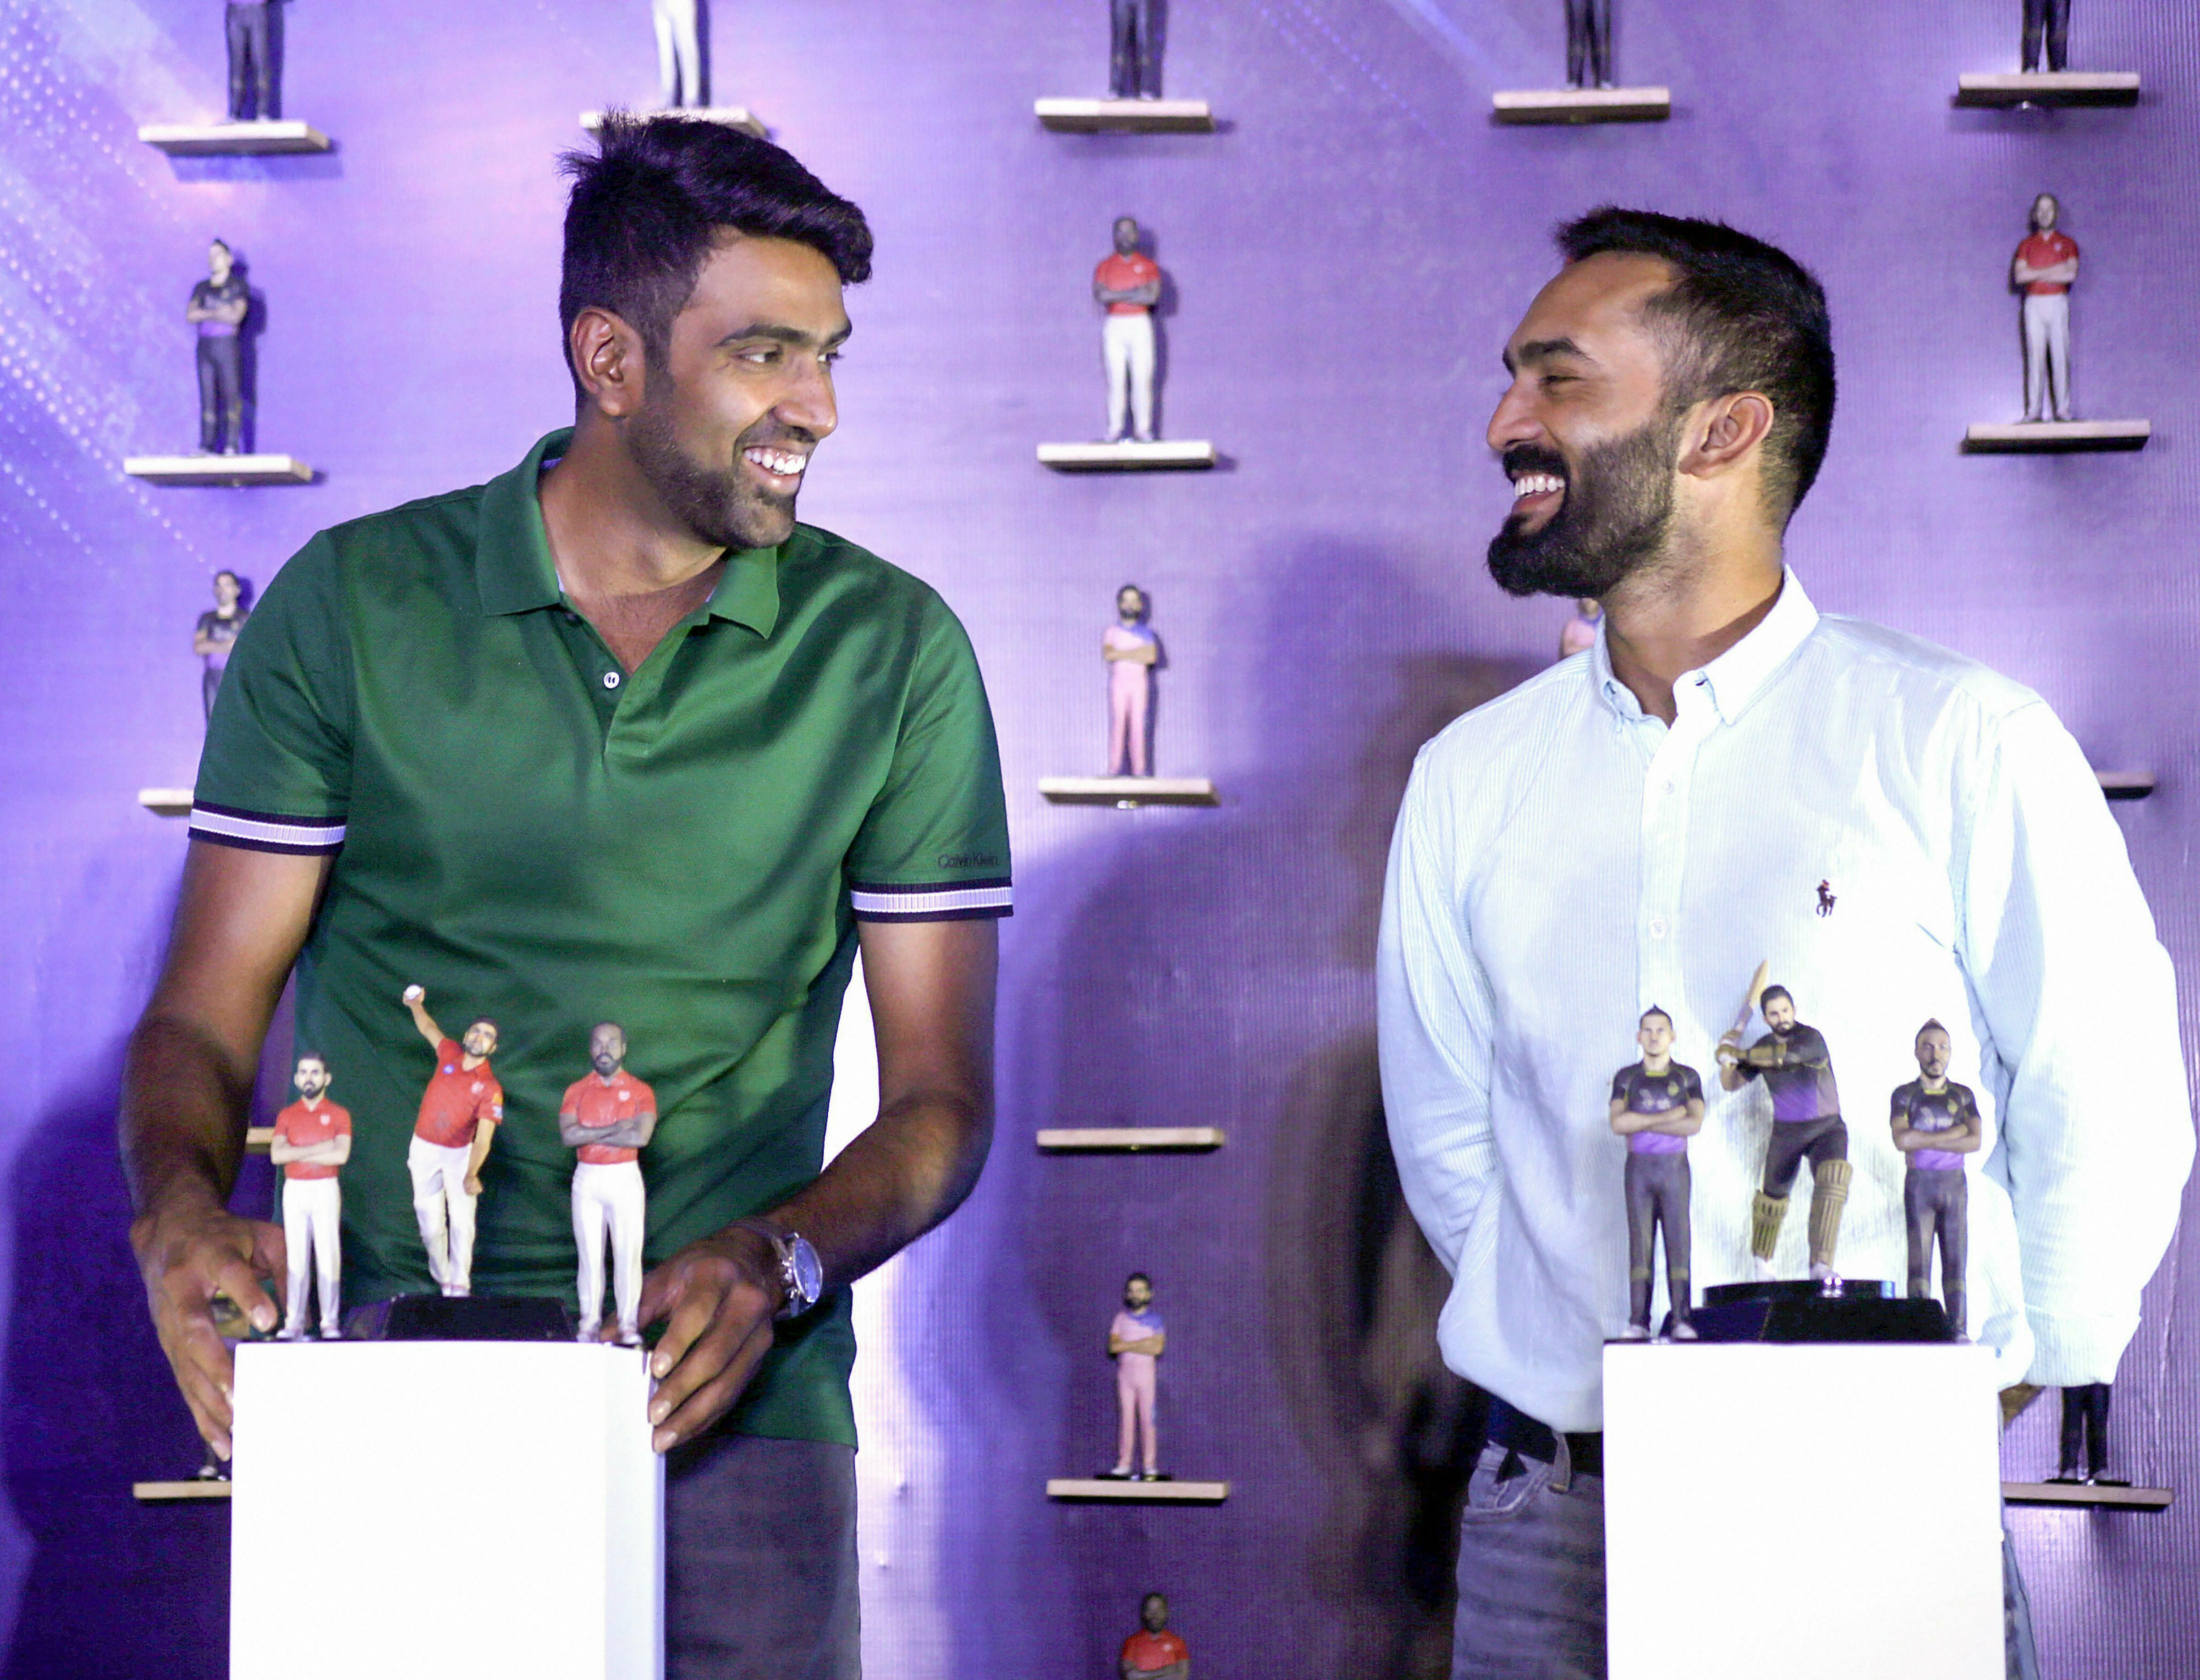 Kings XI Punjab's R Ashwin with Kolkata Knight Riders' Dinesh Karthik at the launch of CricFig official licensed figurine, in Mumbai - PTI